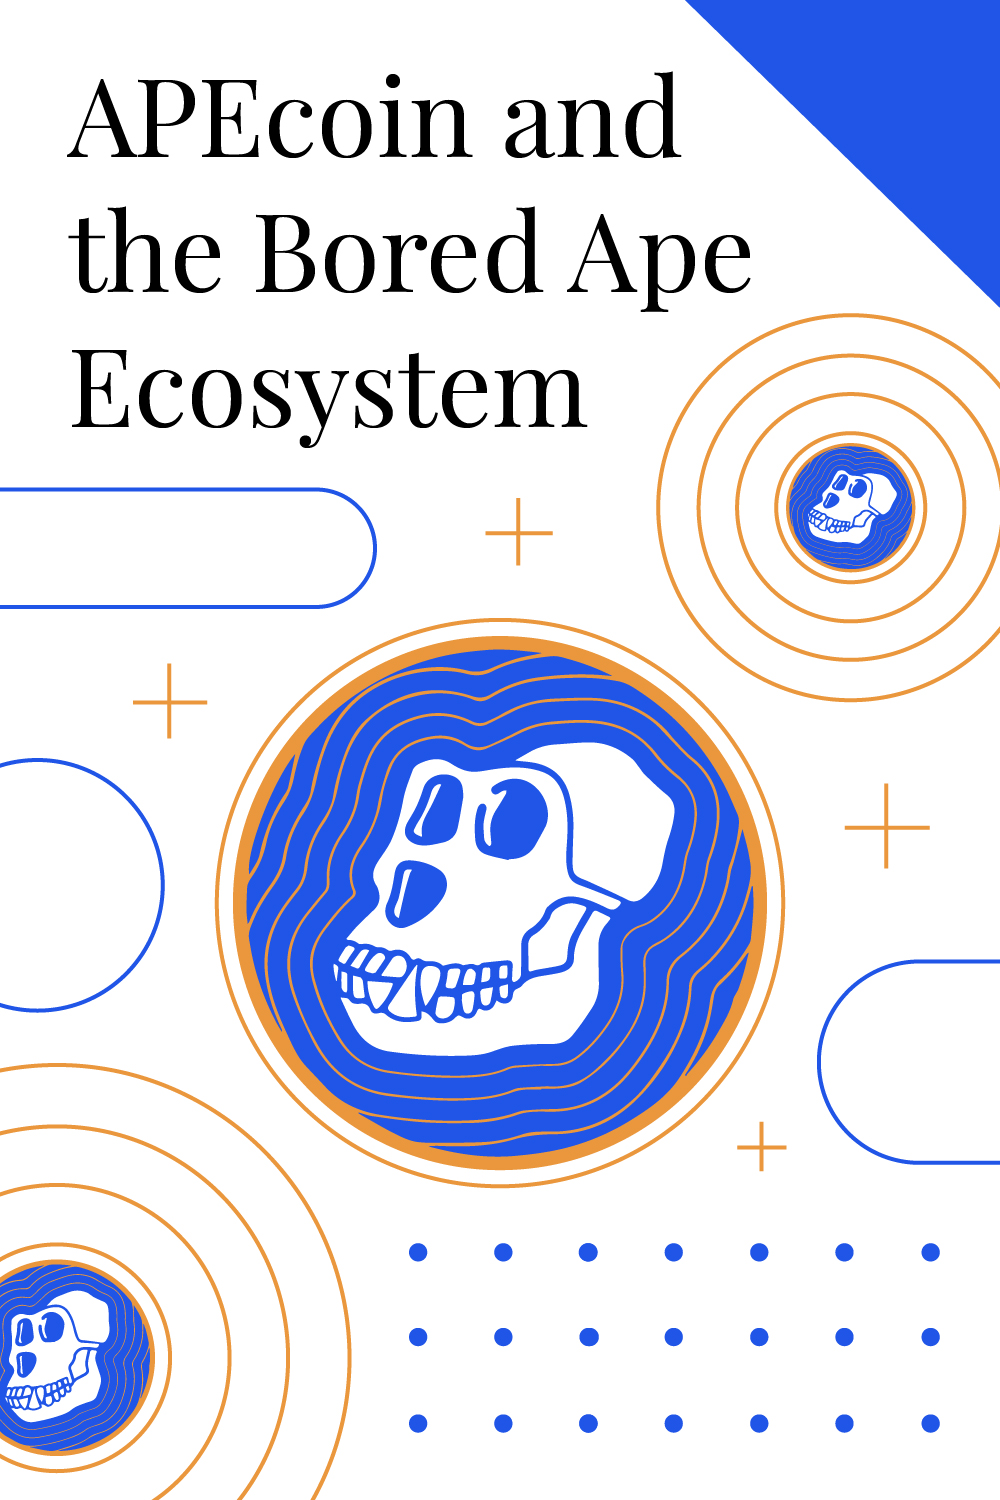 What Is ApeCoin (APE) And The Bored Ape Ecosystem?